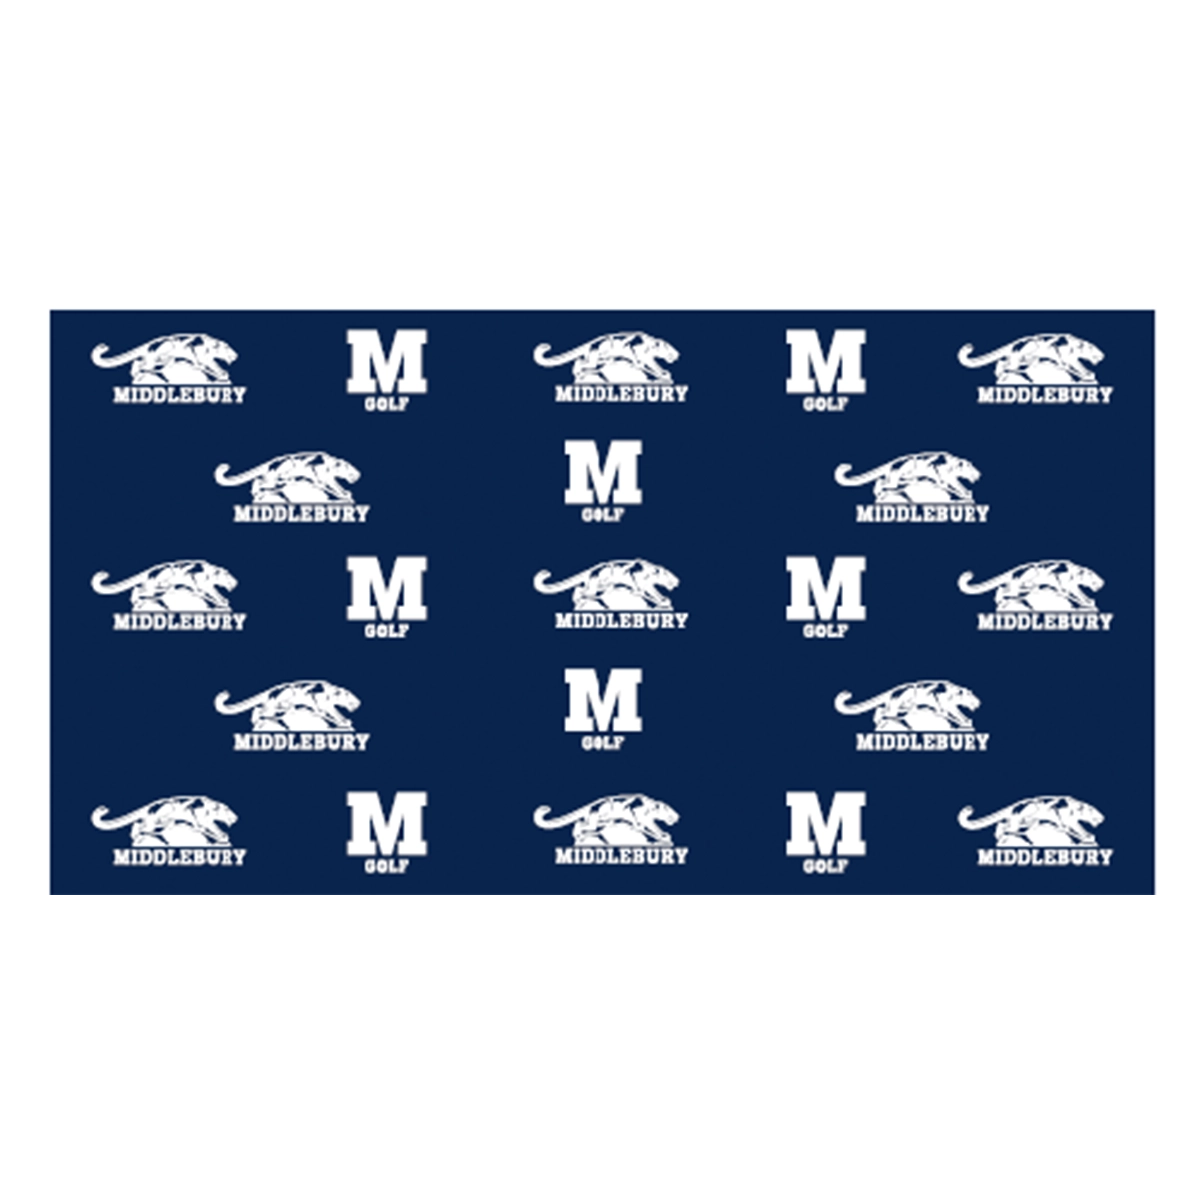 JBT 22" x 42" Middlebury Panther Step and repeat caddy towel (no clip)